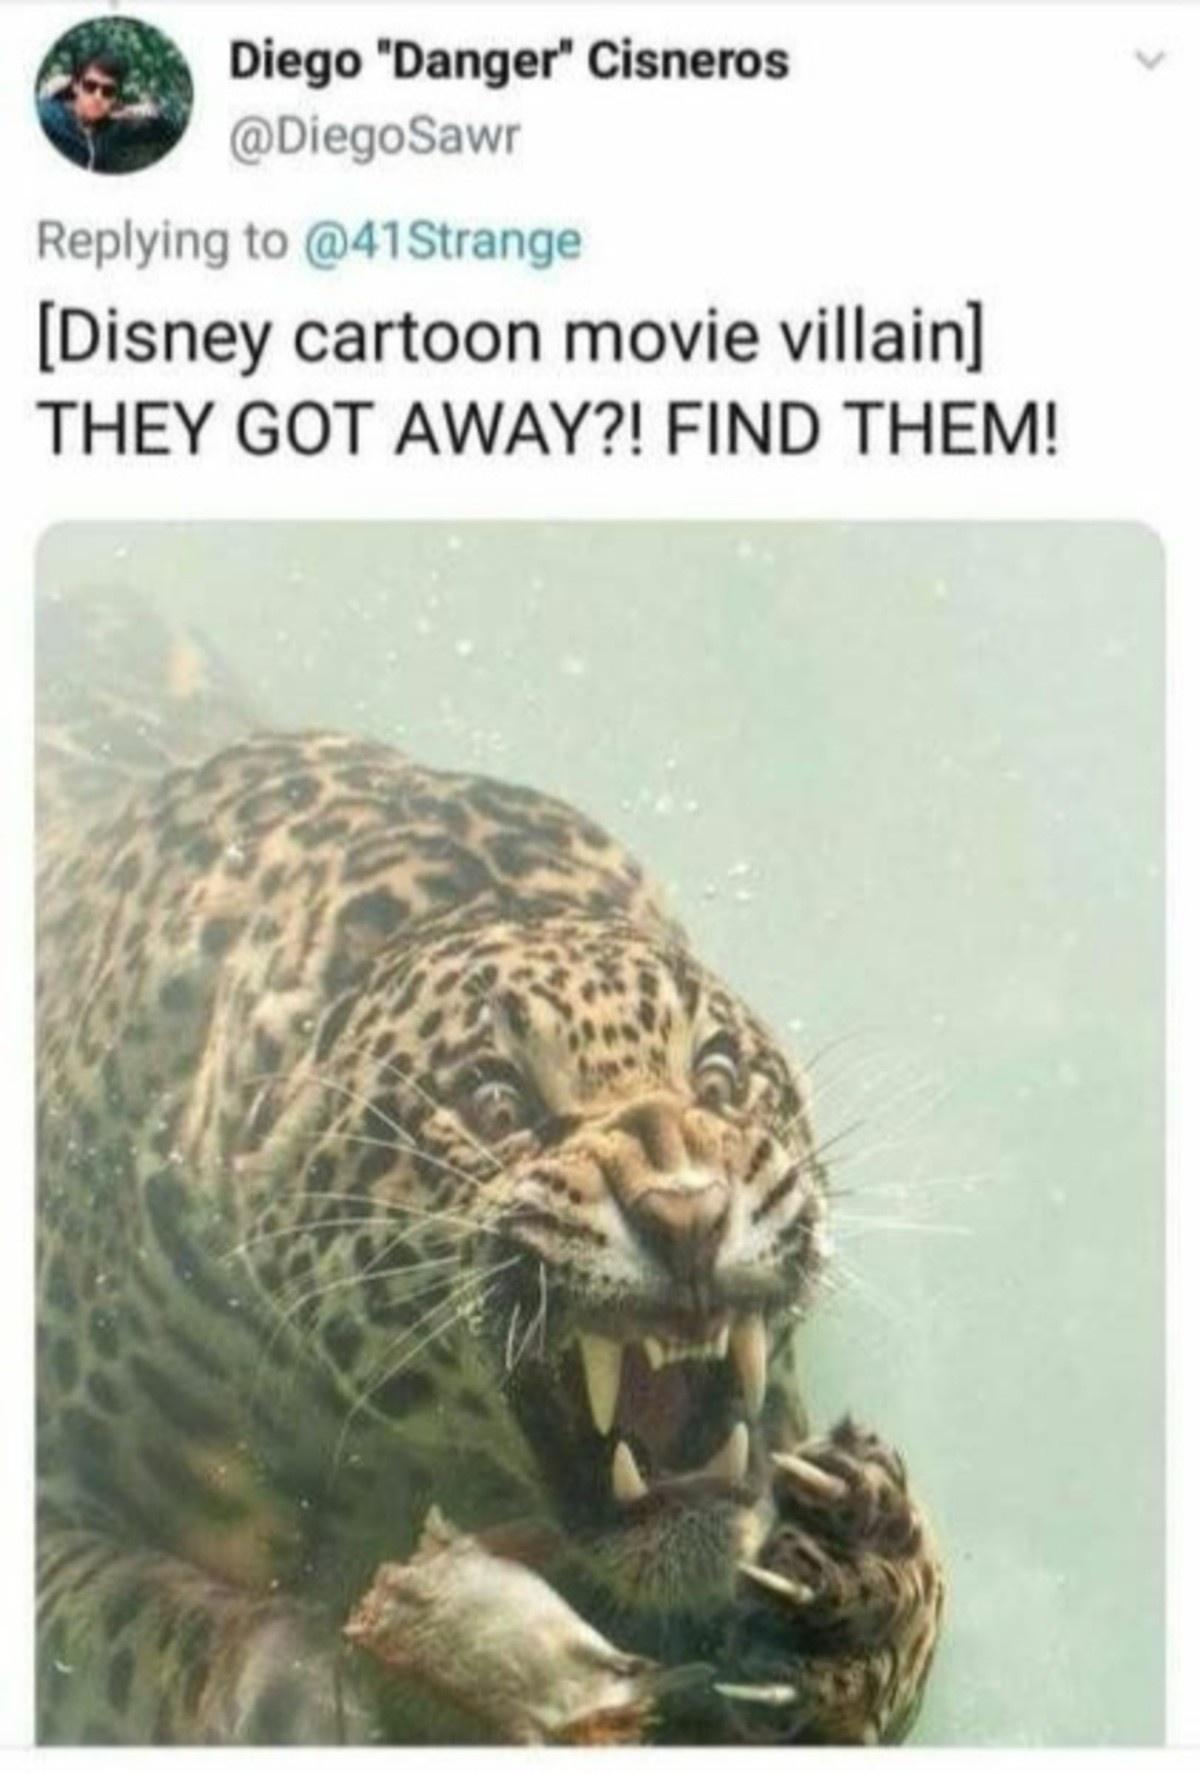 funny pics - disney cartoon movie villain - they got away?! find them - angry cheetah tiger underwater